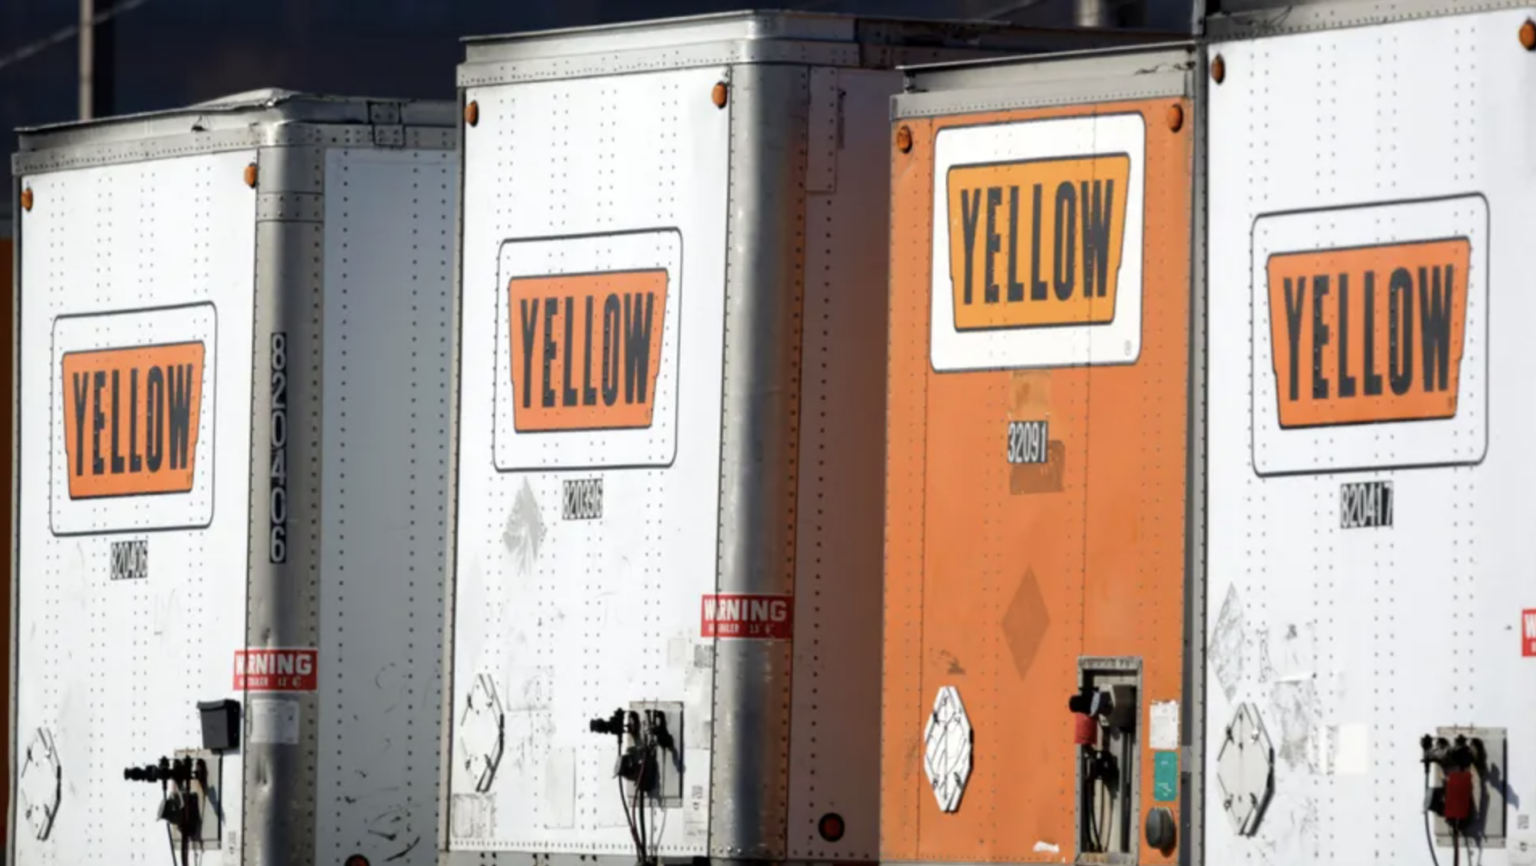 Why Yellow Trucking Company Is Shutting Down ReWork the Bay